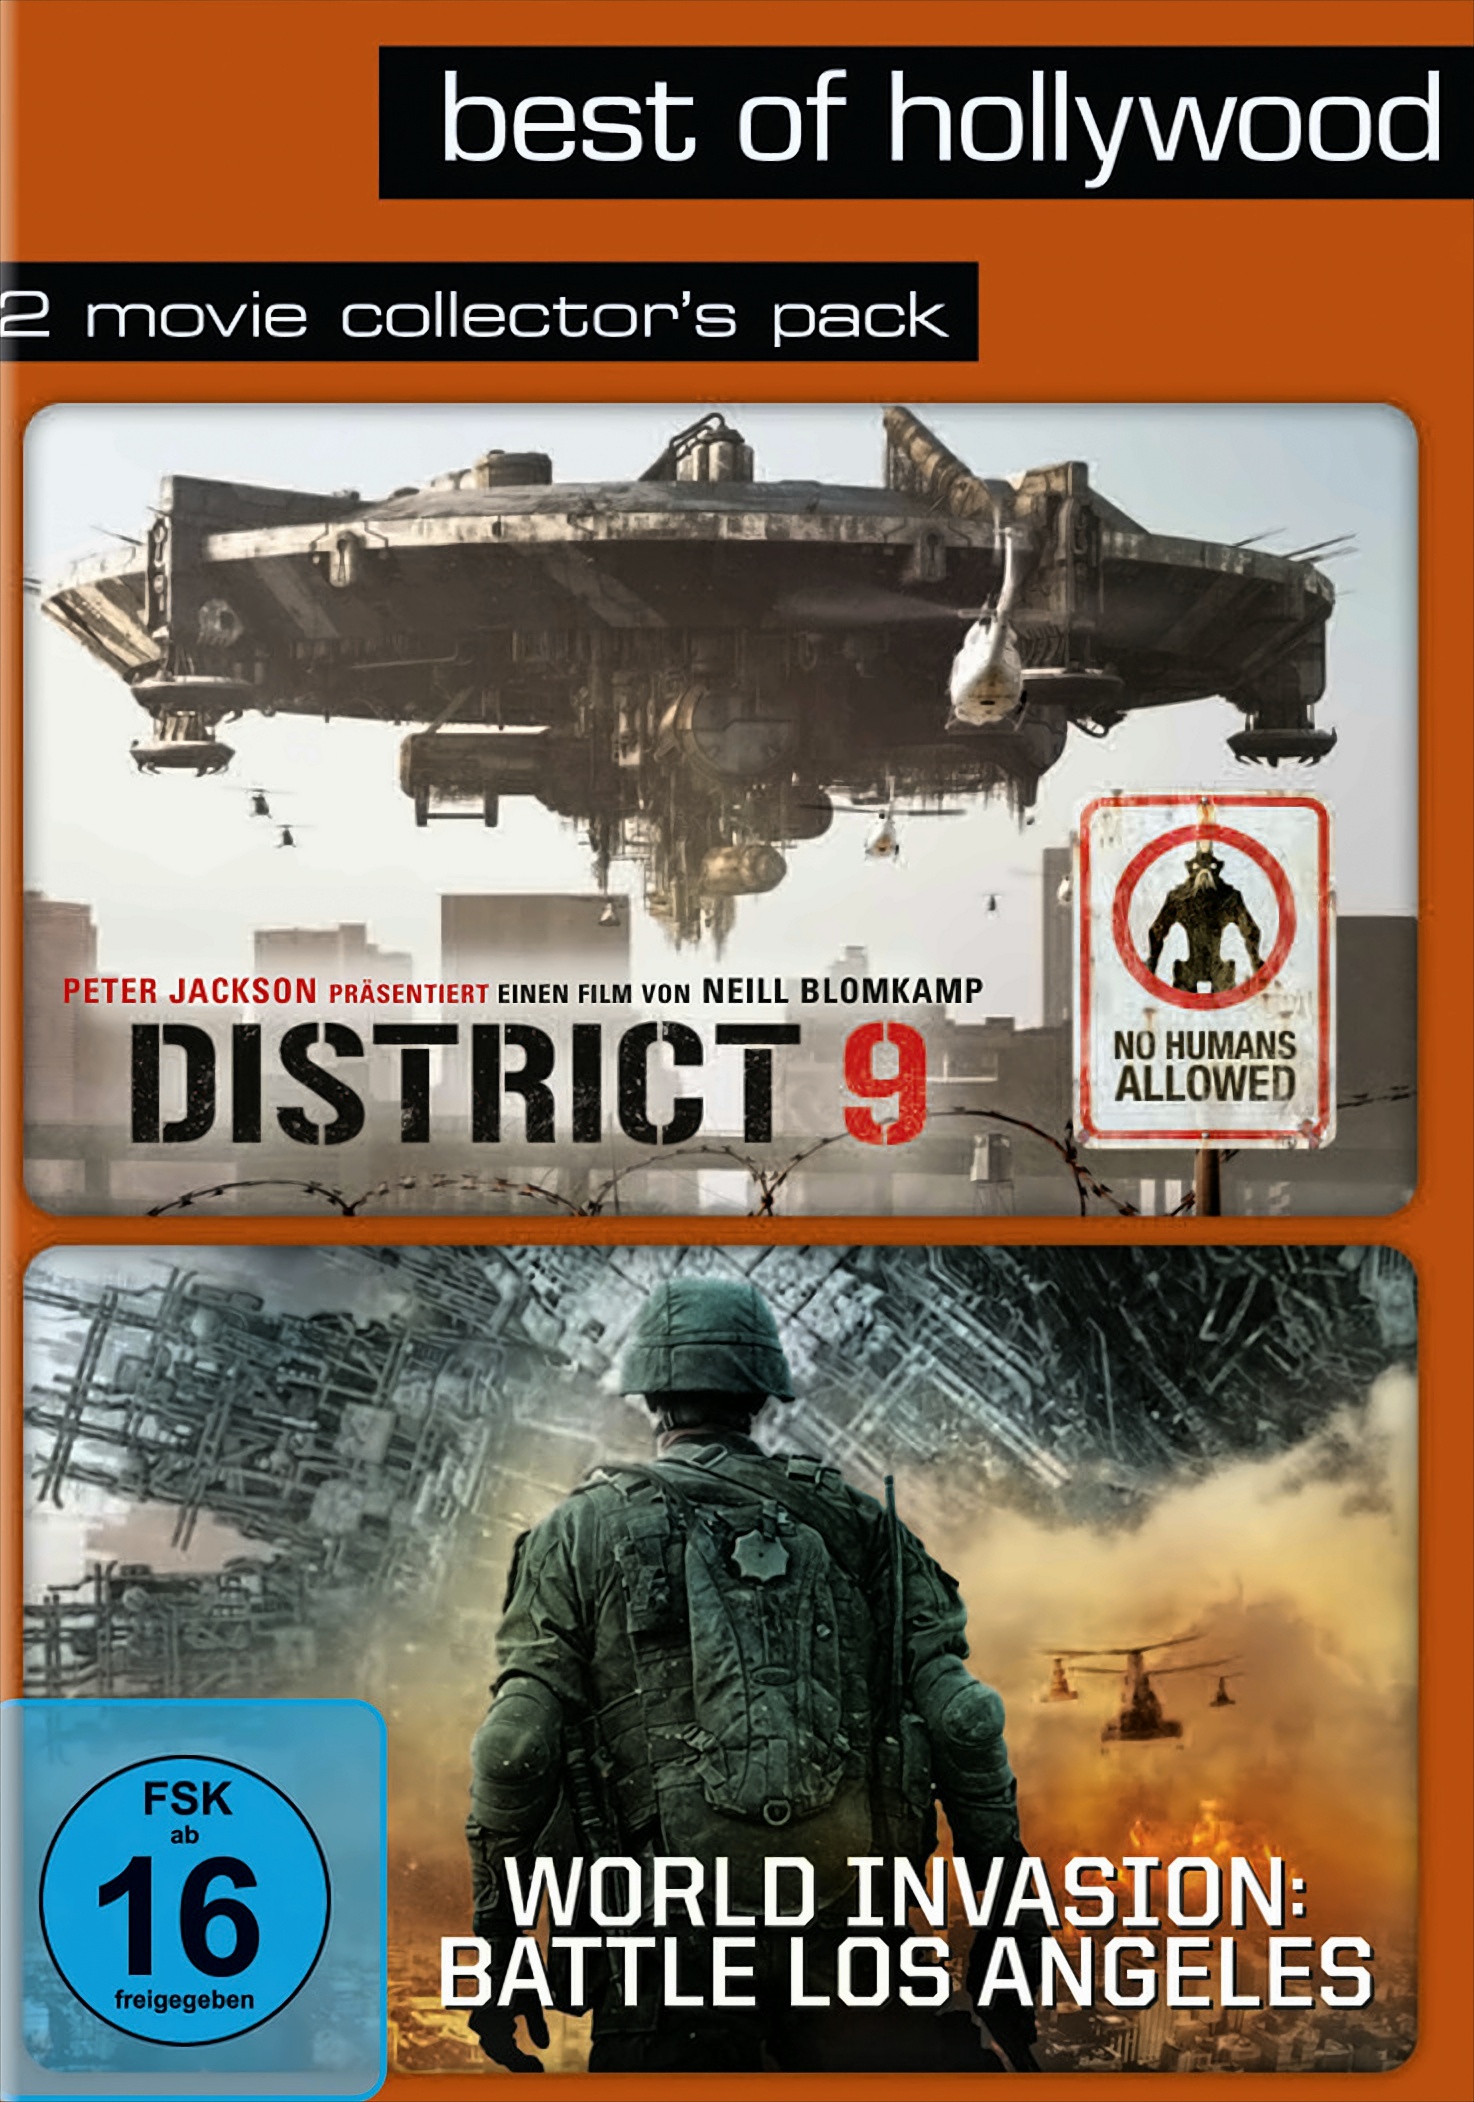 Best of Hollywood - 2 Movie Collector's Pack: District 9 / World Invasion:Battle L. A. (2 Discs) von Sony Pictures